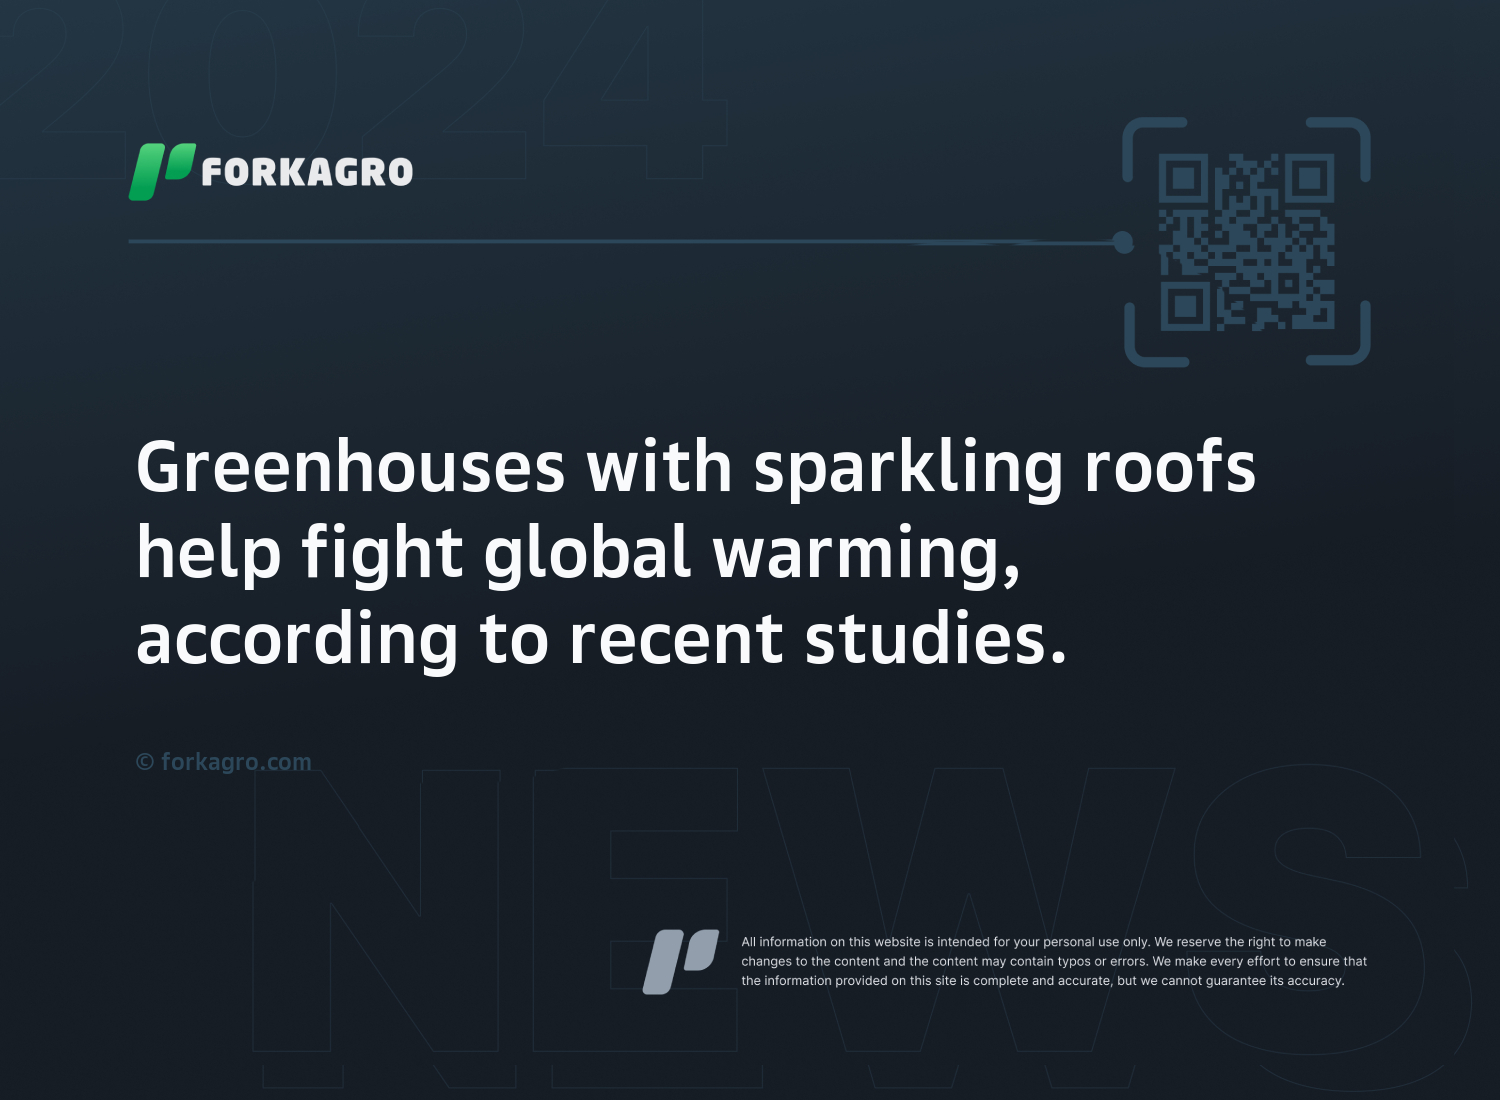 Greenhouses with sparkling roofs help fight global warming, according to recent studies.